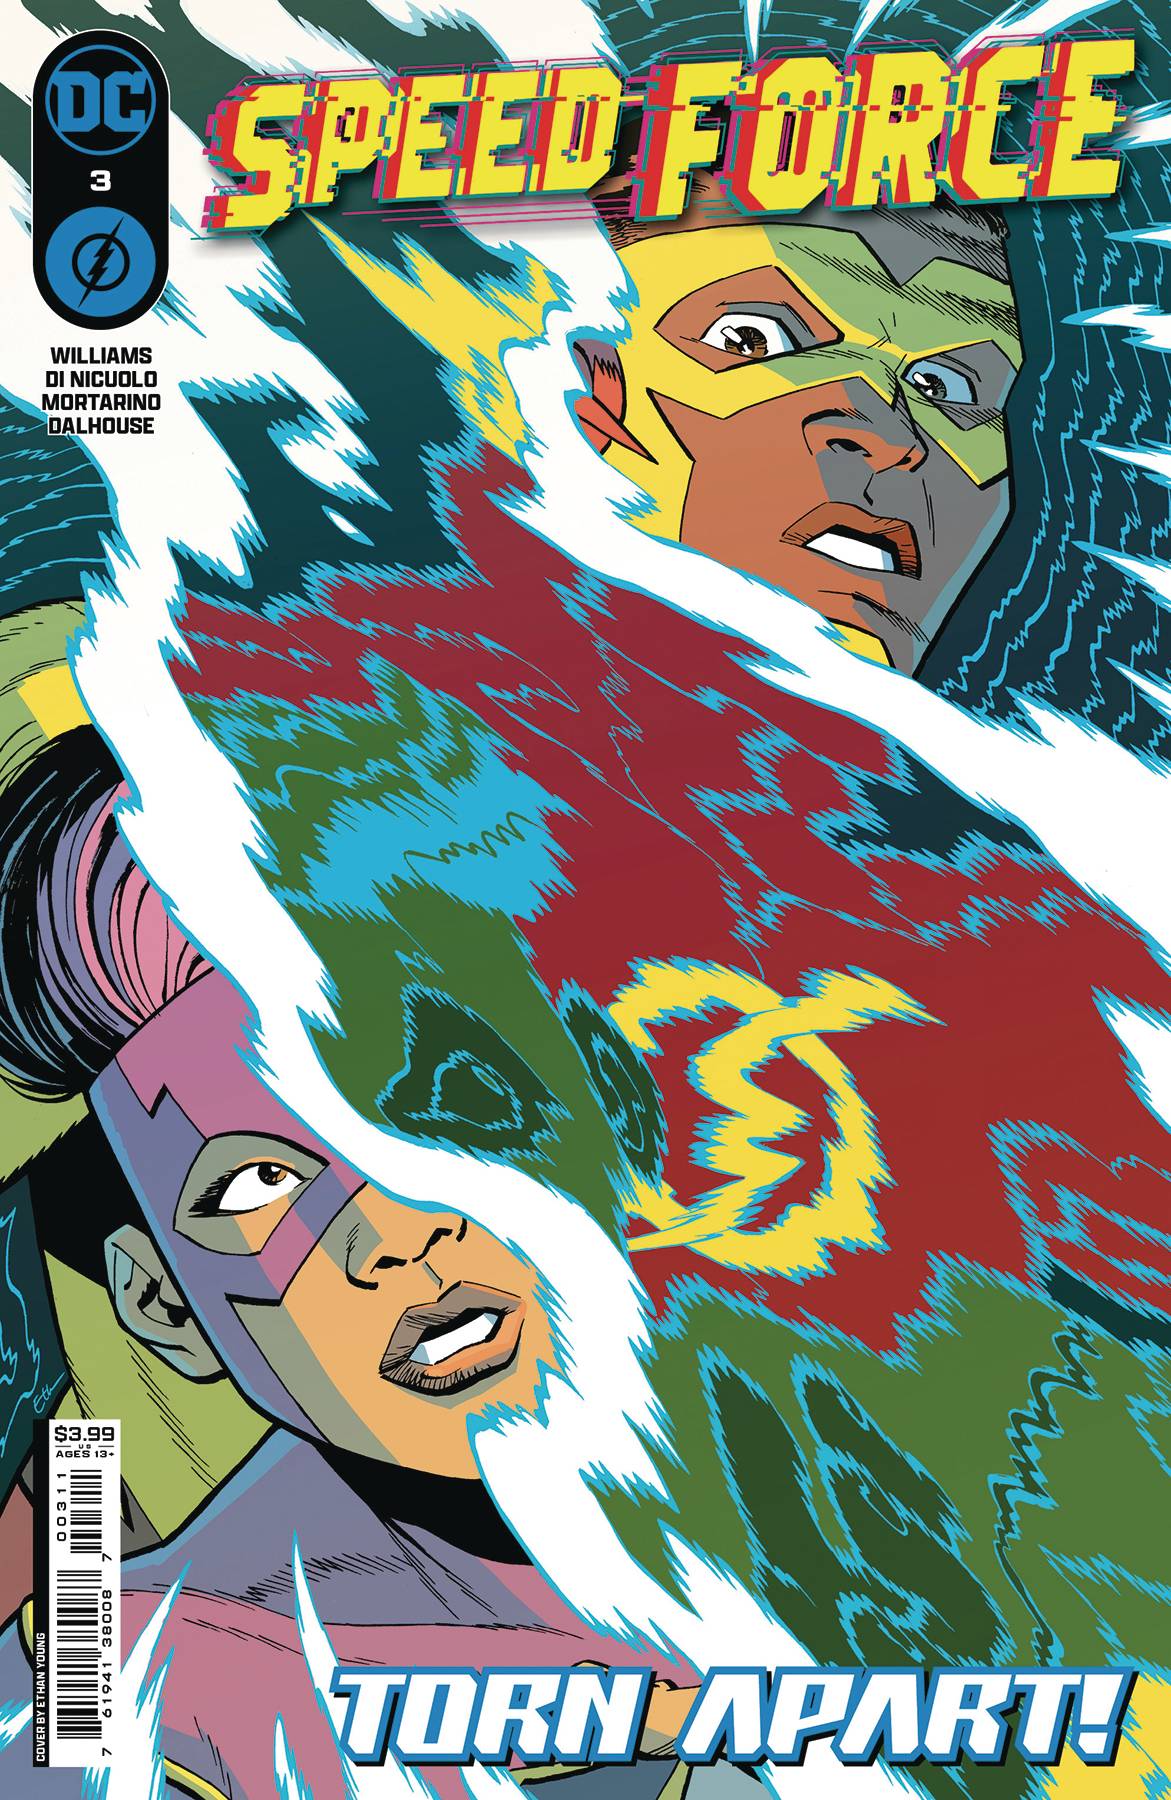 SPEED FORCE #3 (OF 6)